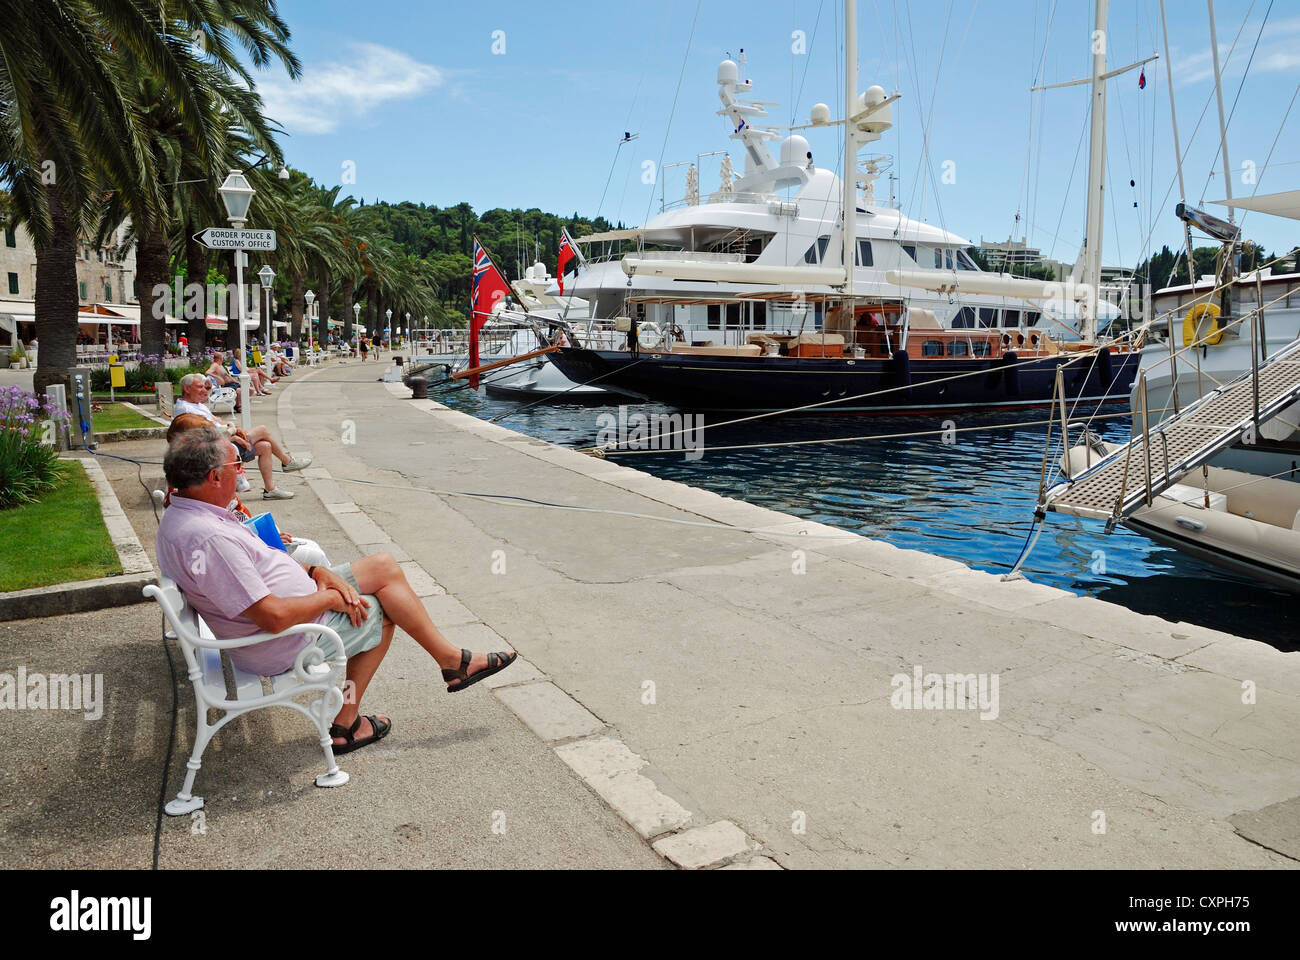 Holidaymakers relaxing on the waterfront at Cavtat, Croatia. Stock Photo